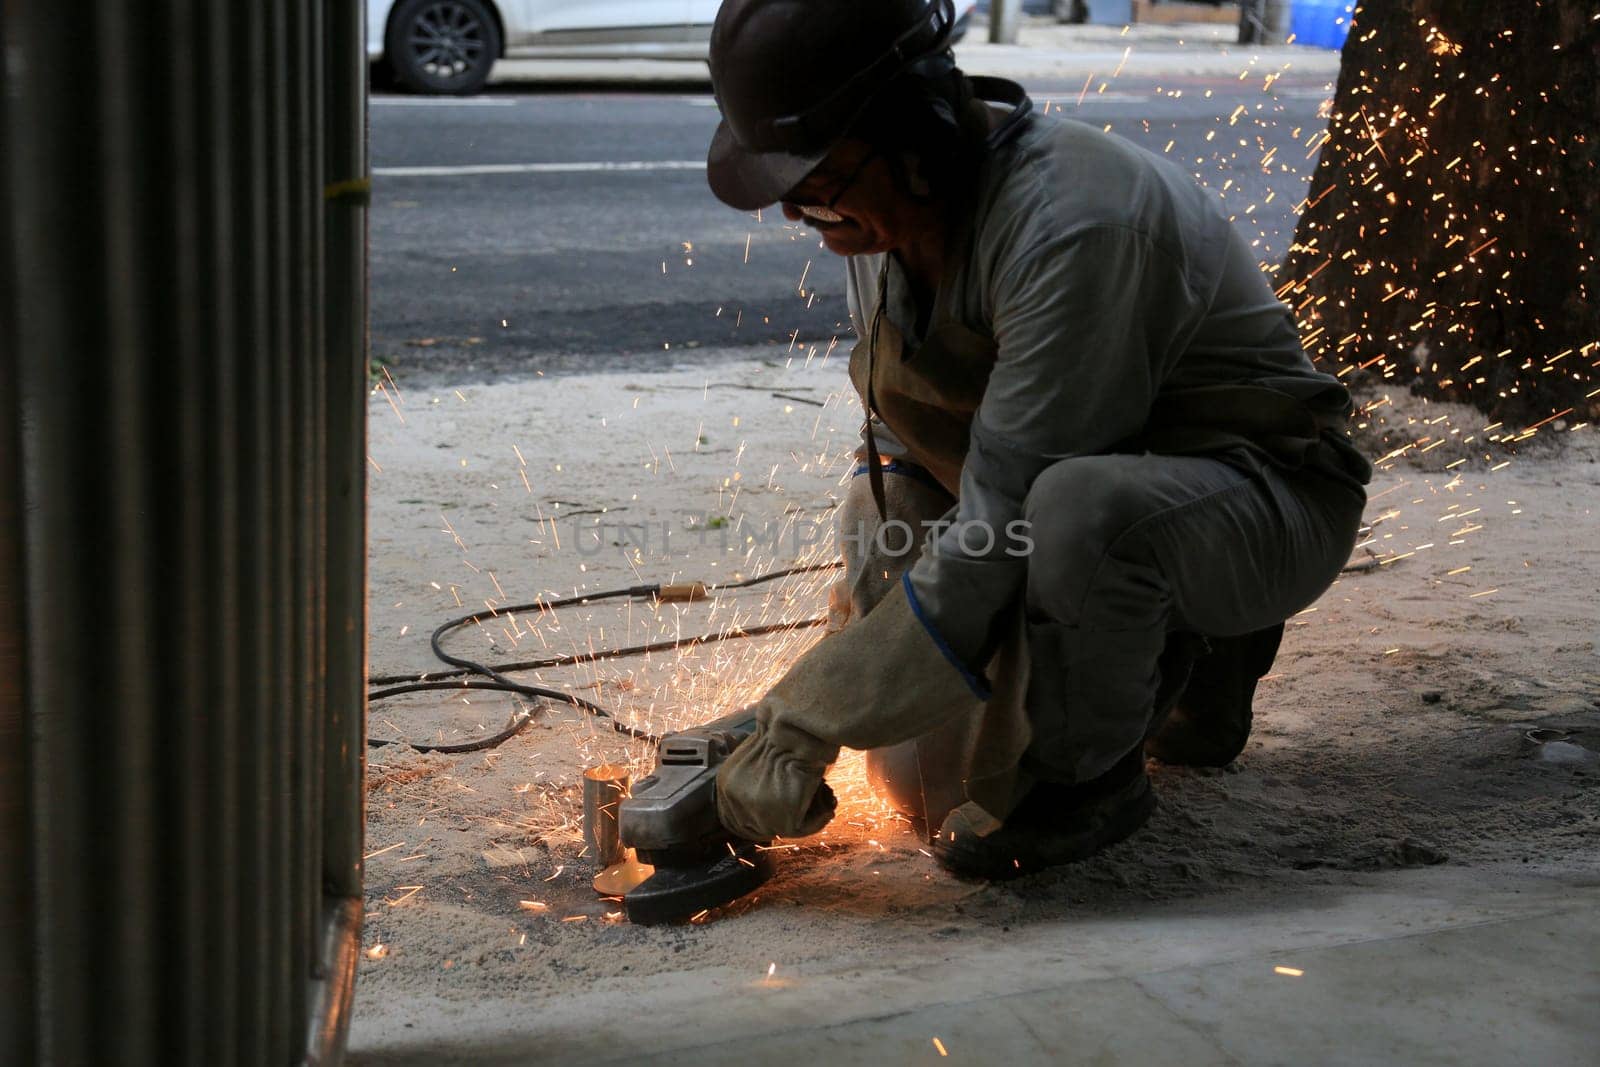 salvador, bahia, brazil - january 25, 2024: worker uses cutting disc to cut metal at a construction site in the city of Salvador.